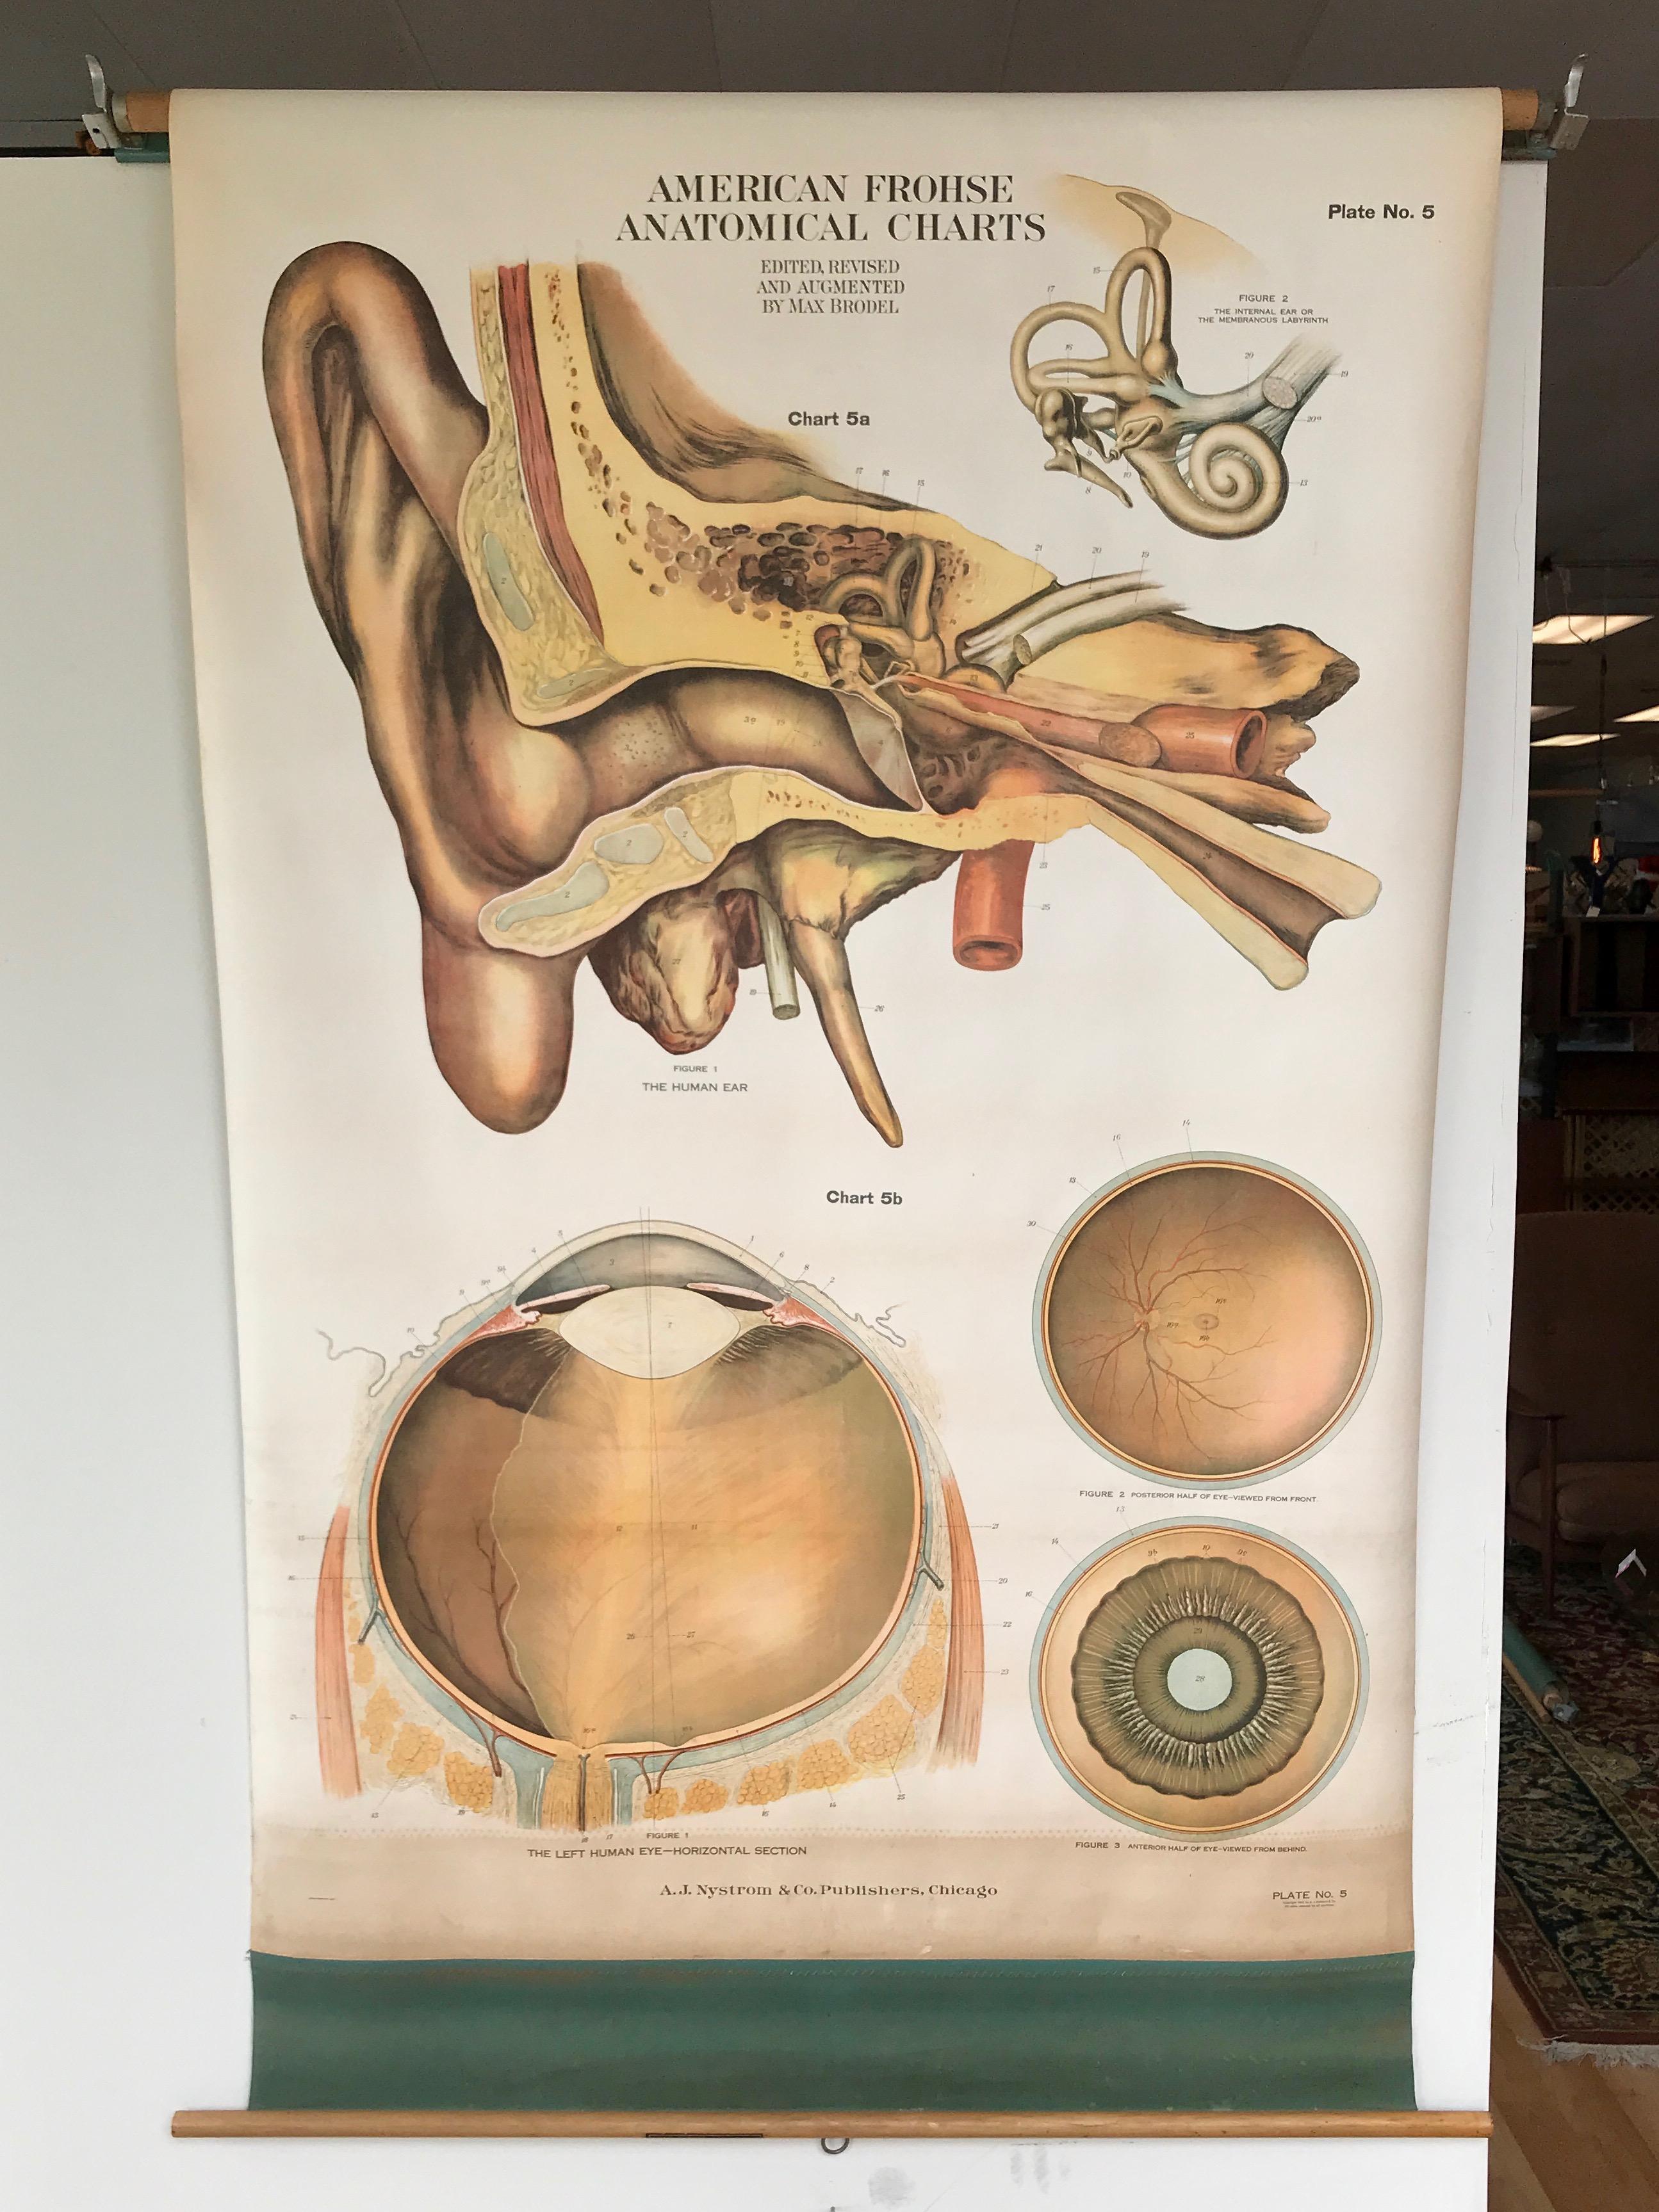 An impressively sized and meticulously executed American Frohse pulldown anatomical chart depicting the human ear and eye, published by A.J. Nystrom & Co., Chicago.

Plate No. 5 in an influential series of large, highly detailed color lithographs